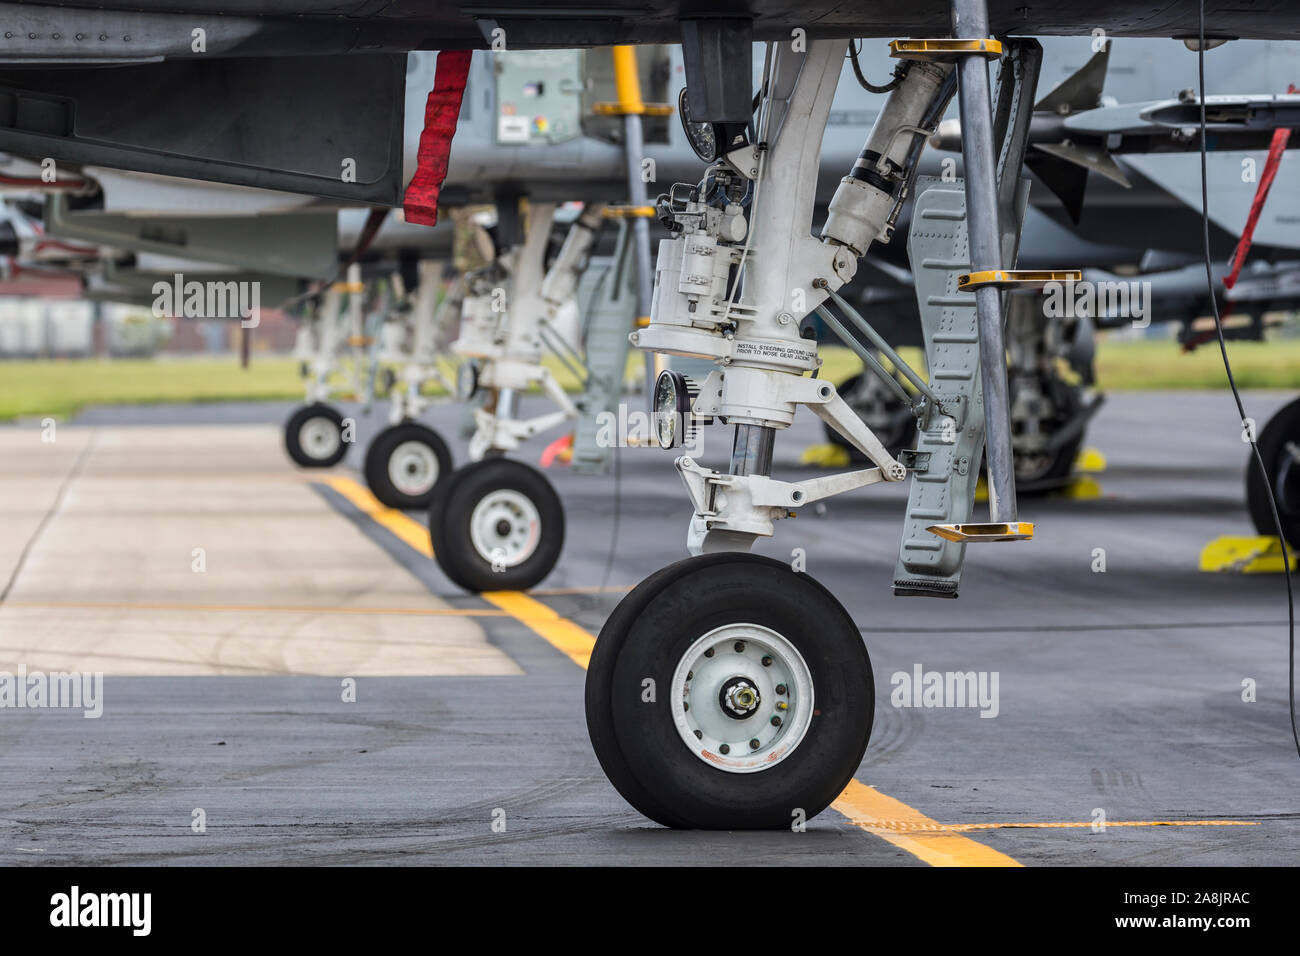 United States Air Force A-10 Thunderbolt II 'Warthogs' on the hot ramp of the 2019 Fort Wayne Airshow. Stock Photo